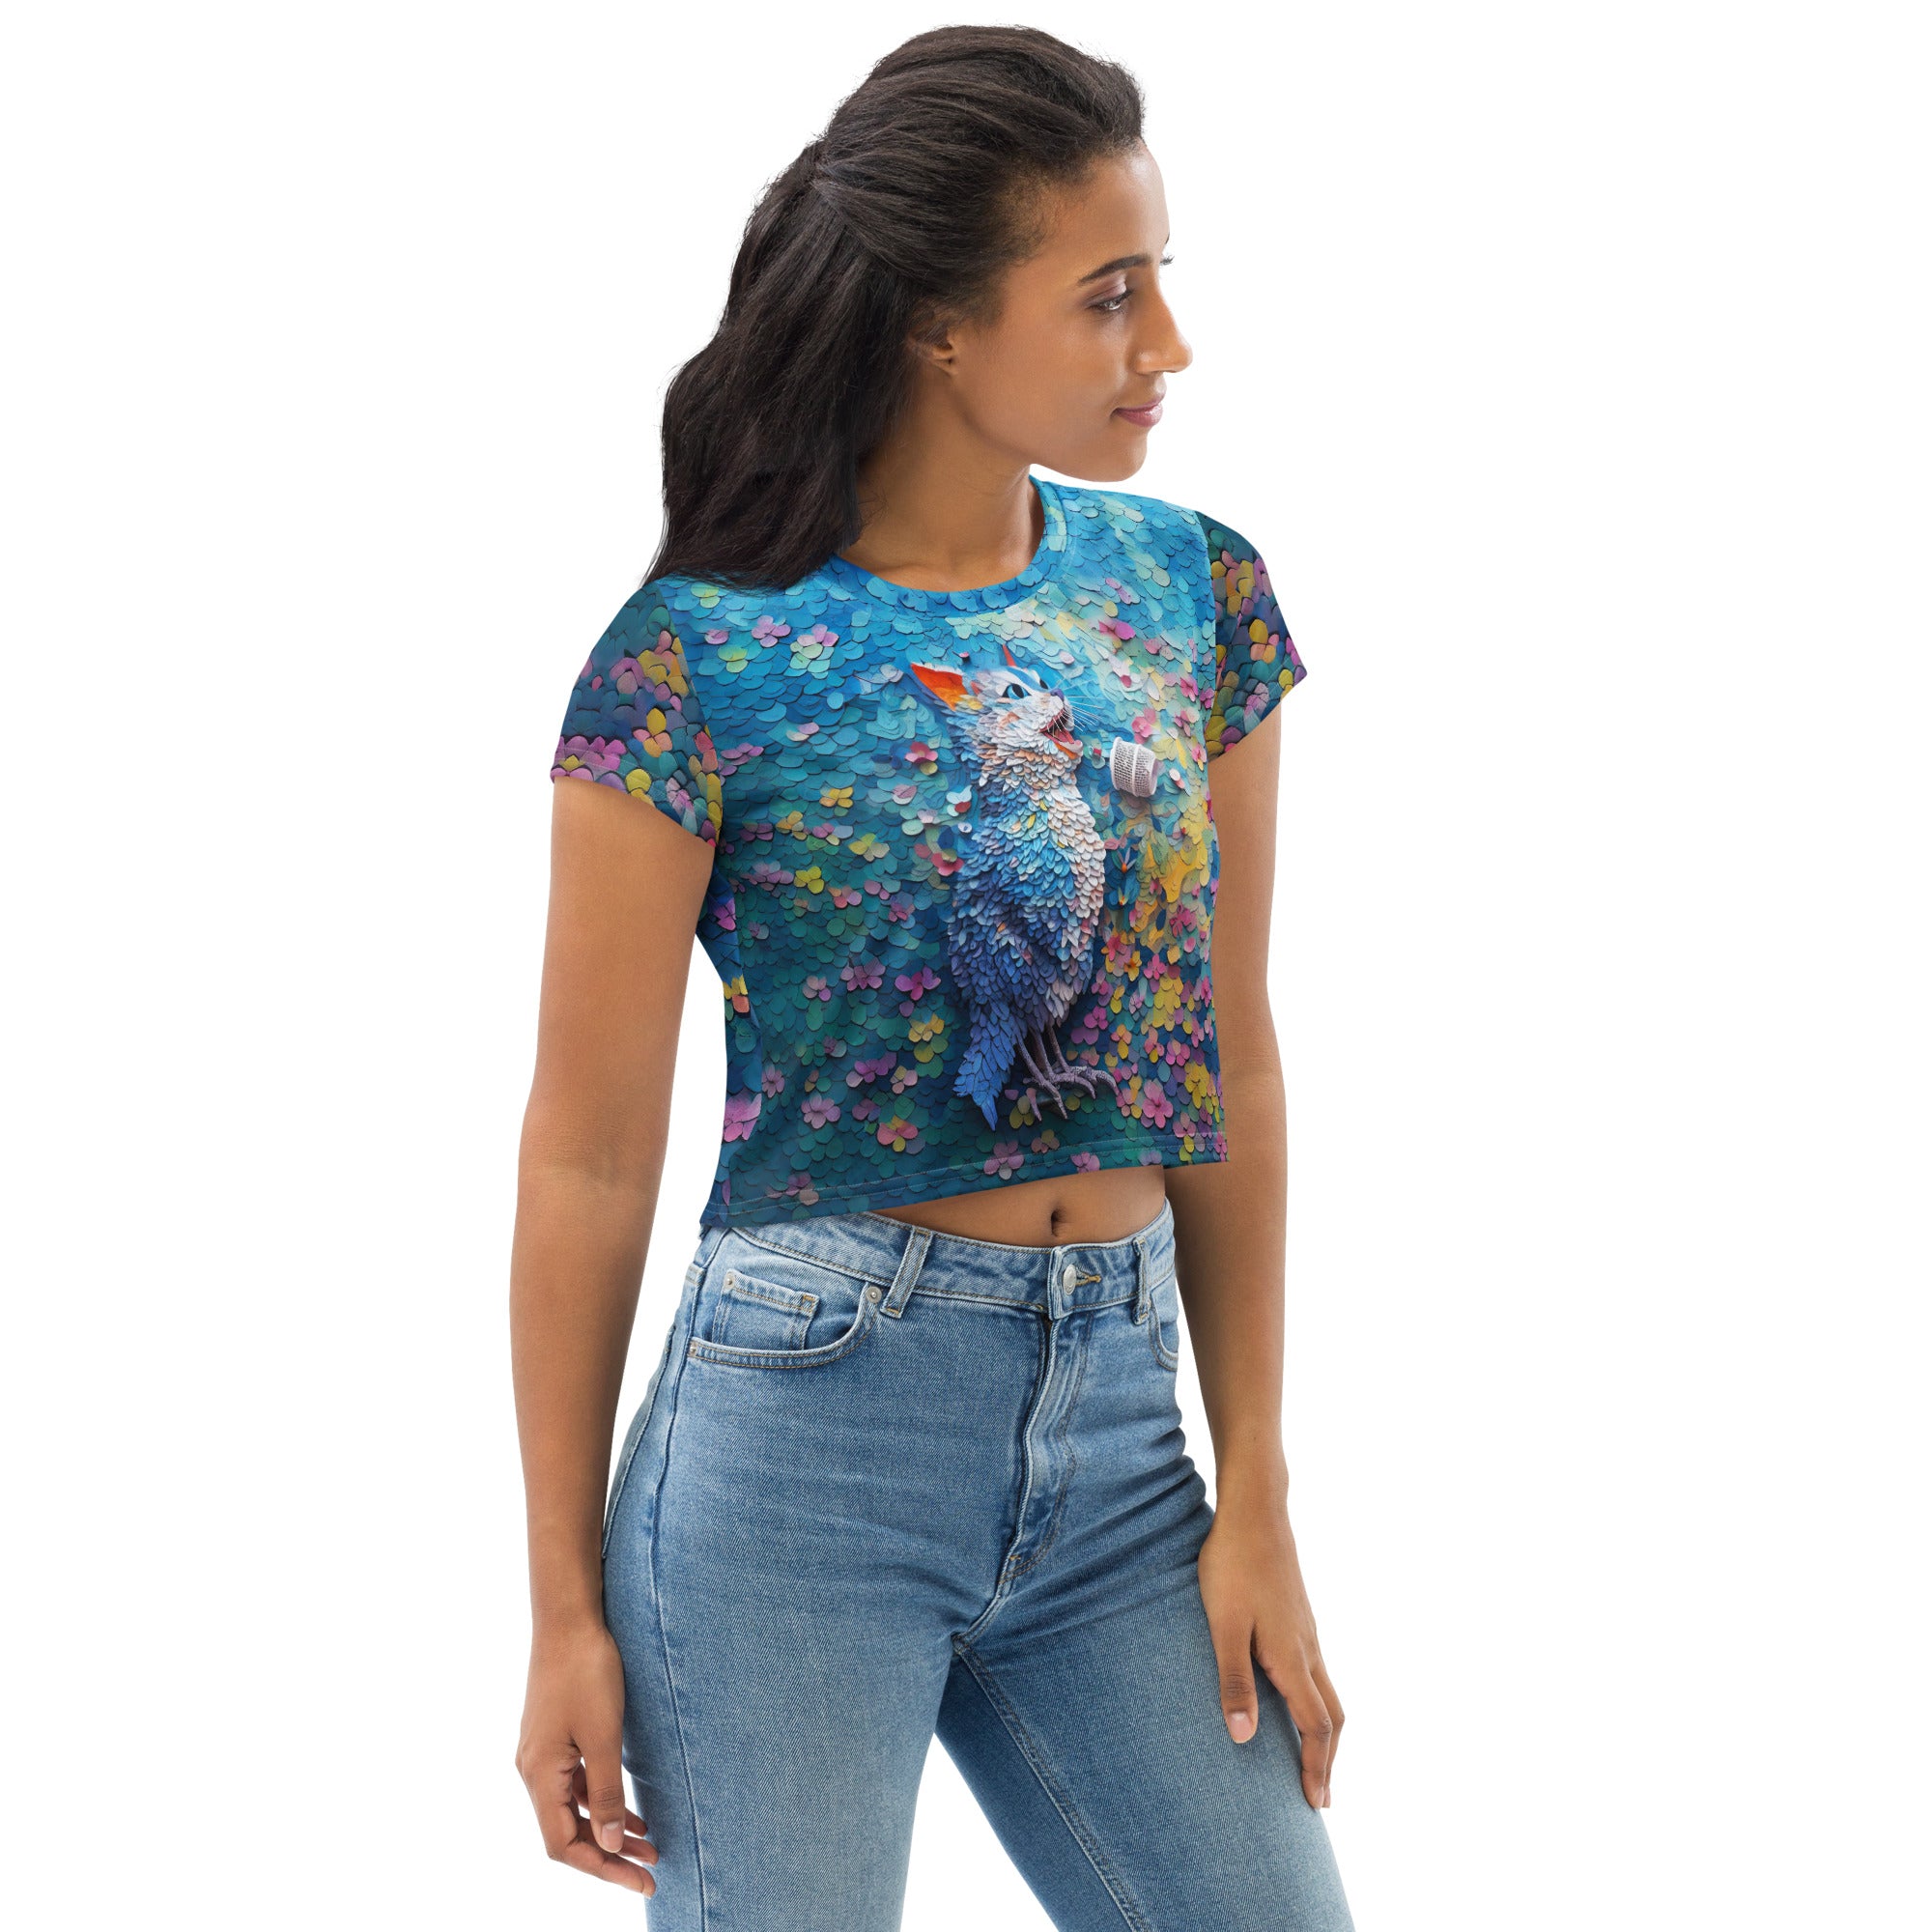 Dragon Dance Delight Women's Crop Tee paired with jeans in a casual setting.